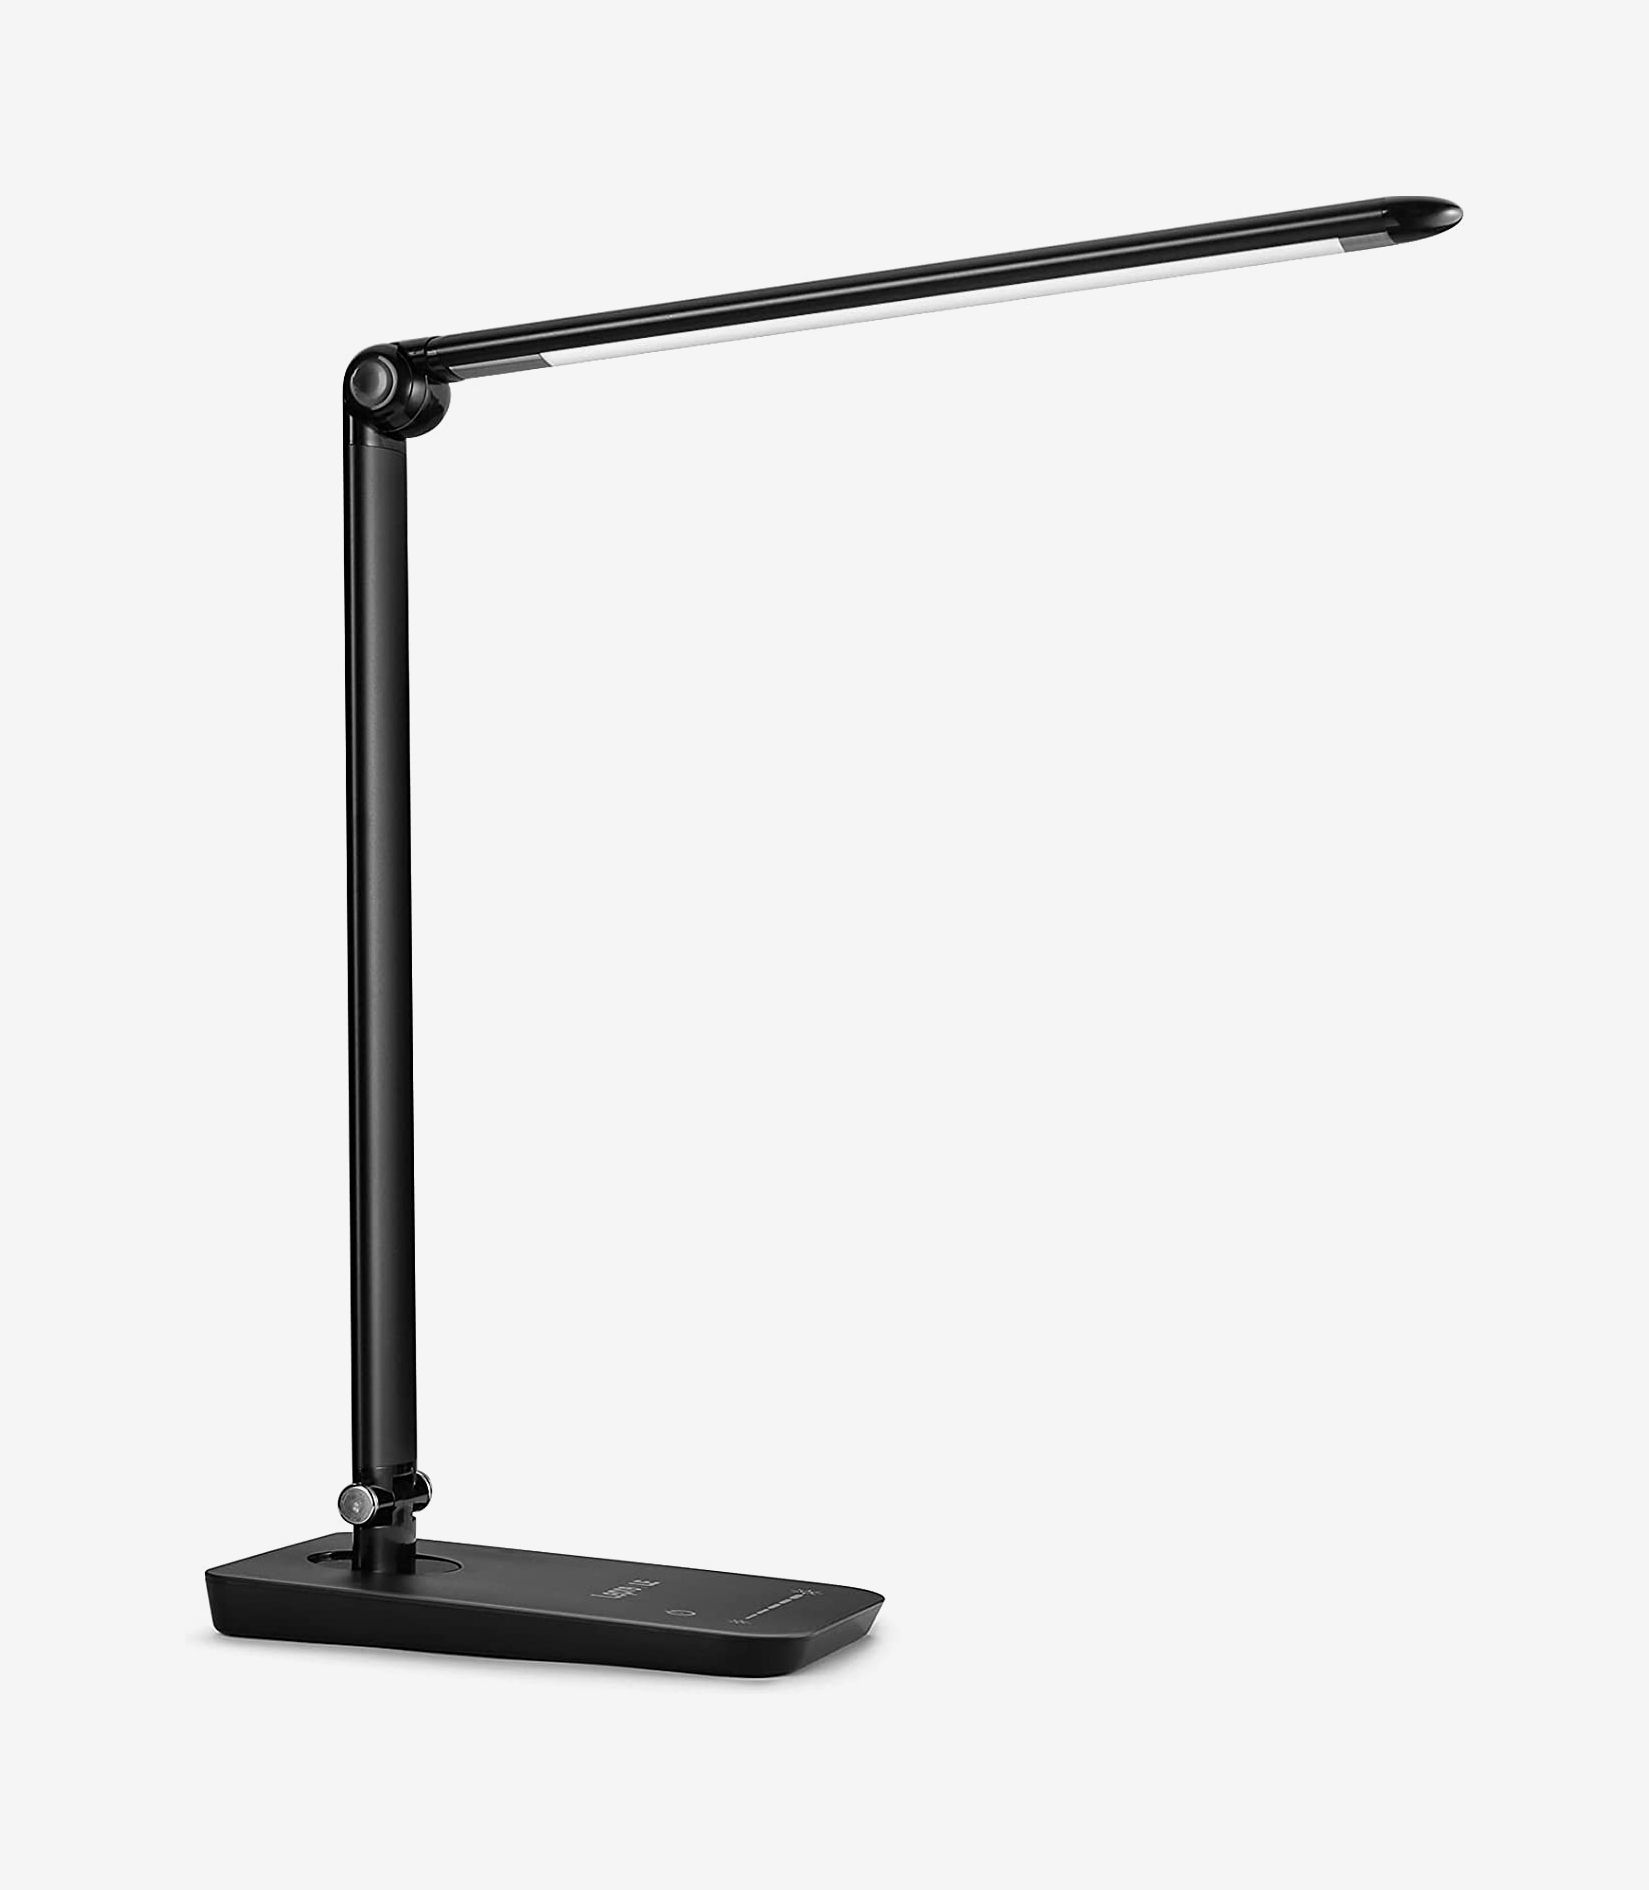 Eye-Caring LED Light Lamp for The Bedroom or Office LED Desk Lamp with Touch Control Cordless Dimmable Table Lamp LITTIL Bright 